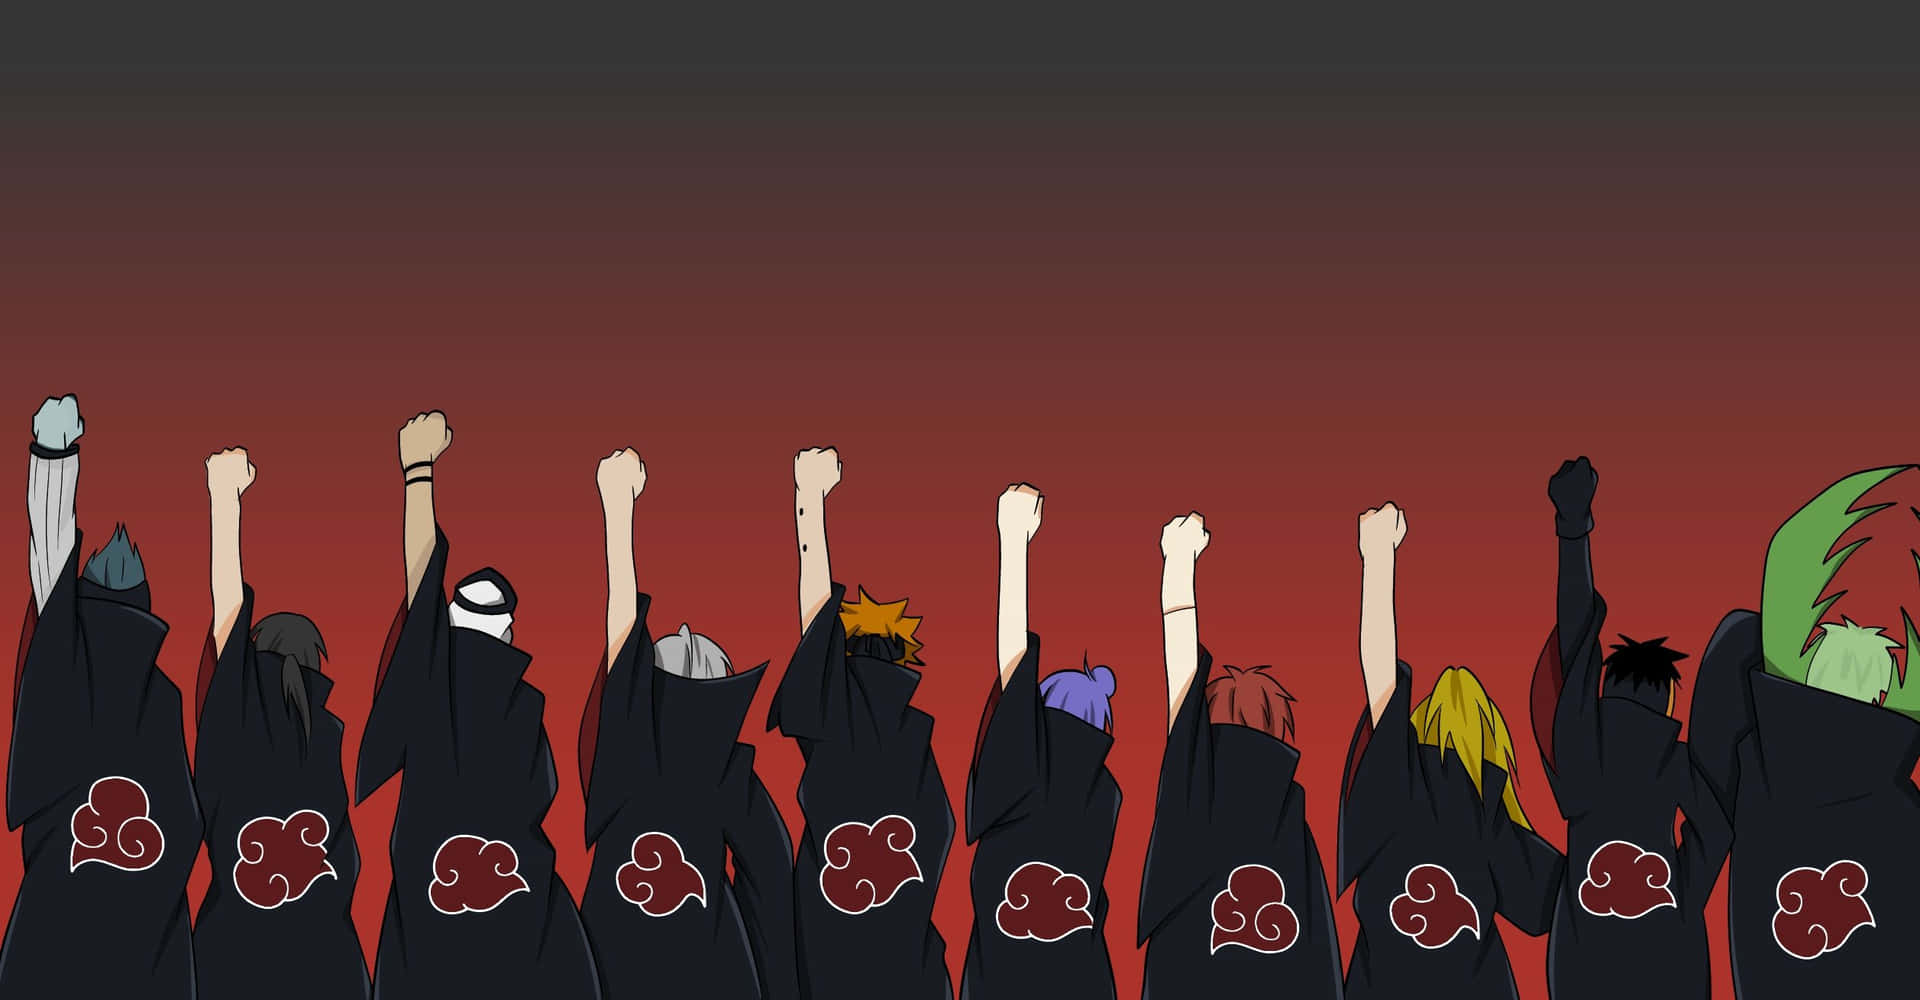 Download Uchiha Clan wallpapers for mobile phone free Uchiha Clan HD  pictures